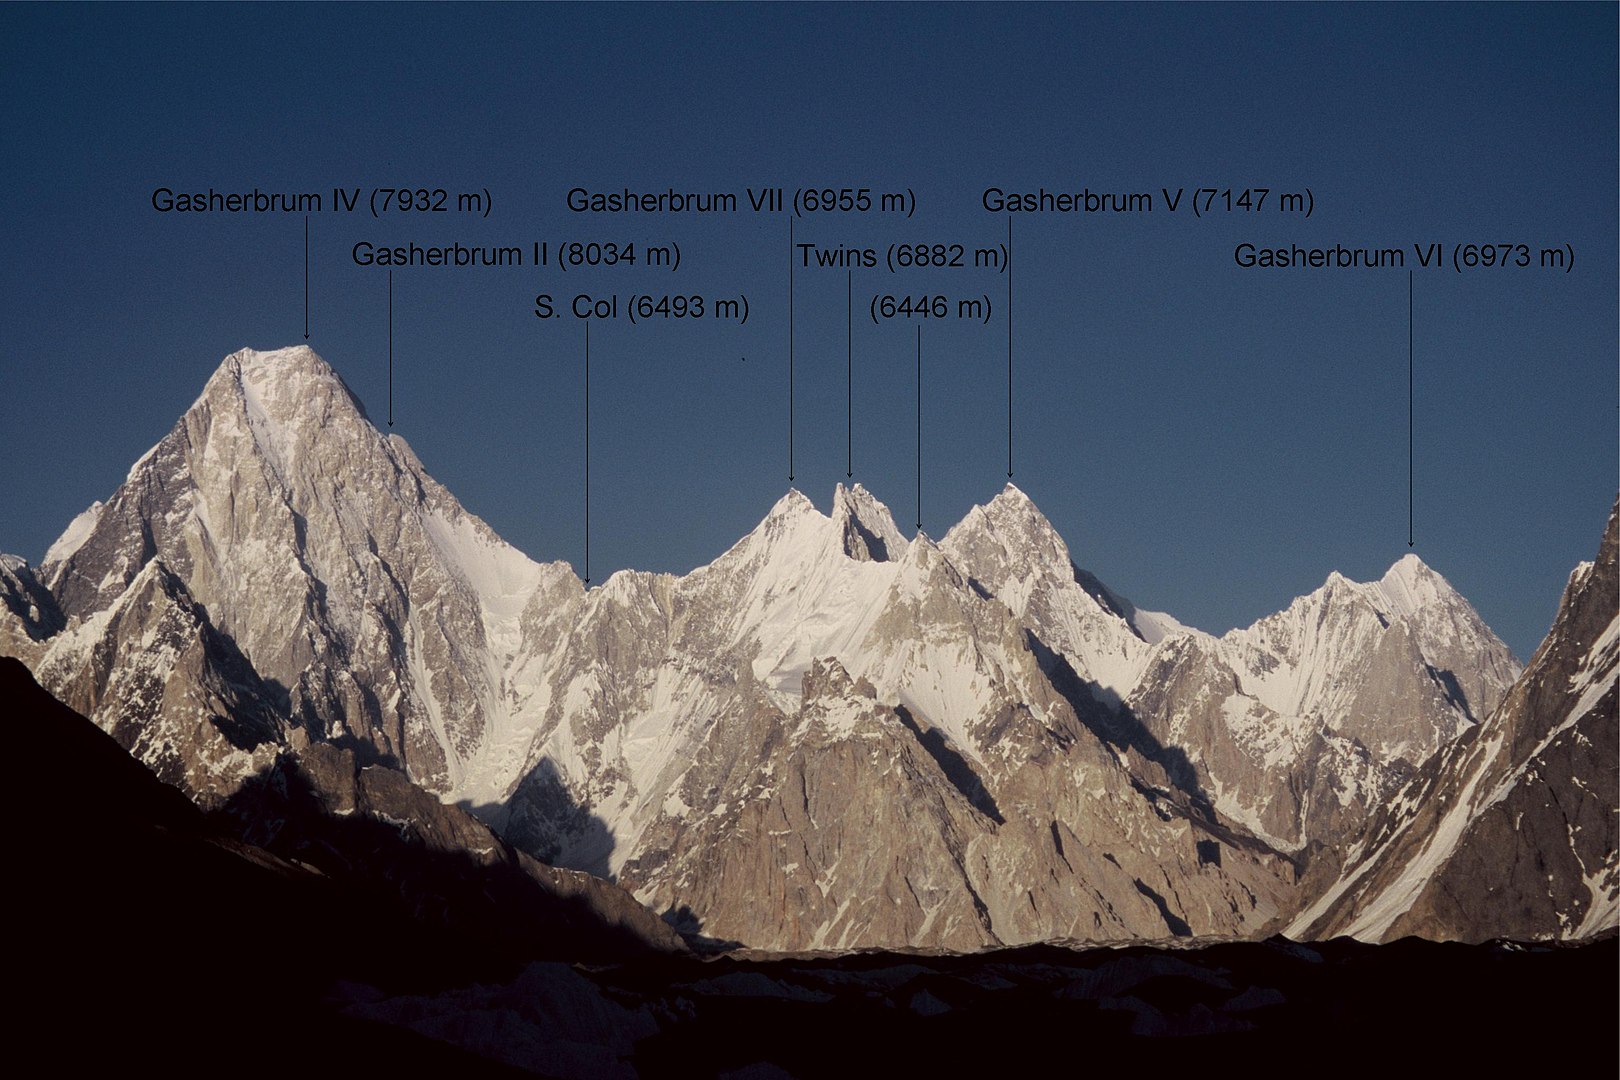 The west faces of Gasherbrum IV, V, VI, and VII. The peak of Gasherbrum II is just barely visible behind the southern ridge of Gasherbrum IV. Gasherbrum I (Hidden Peak) is hidden behind Gasherbrum V. [Photo] Florian Ederer, Wikimedia